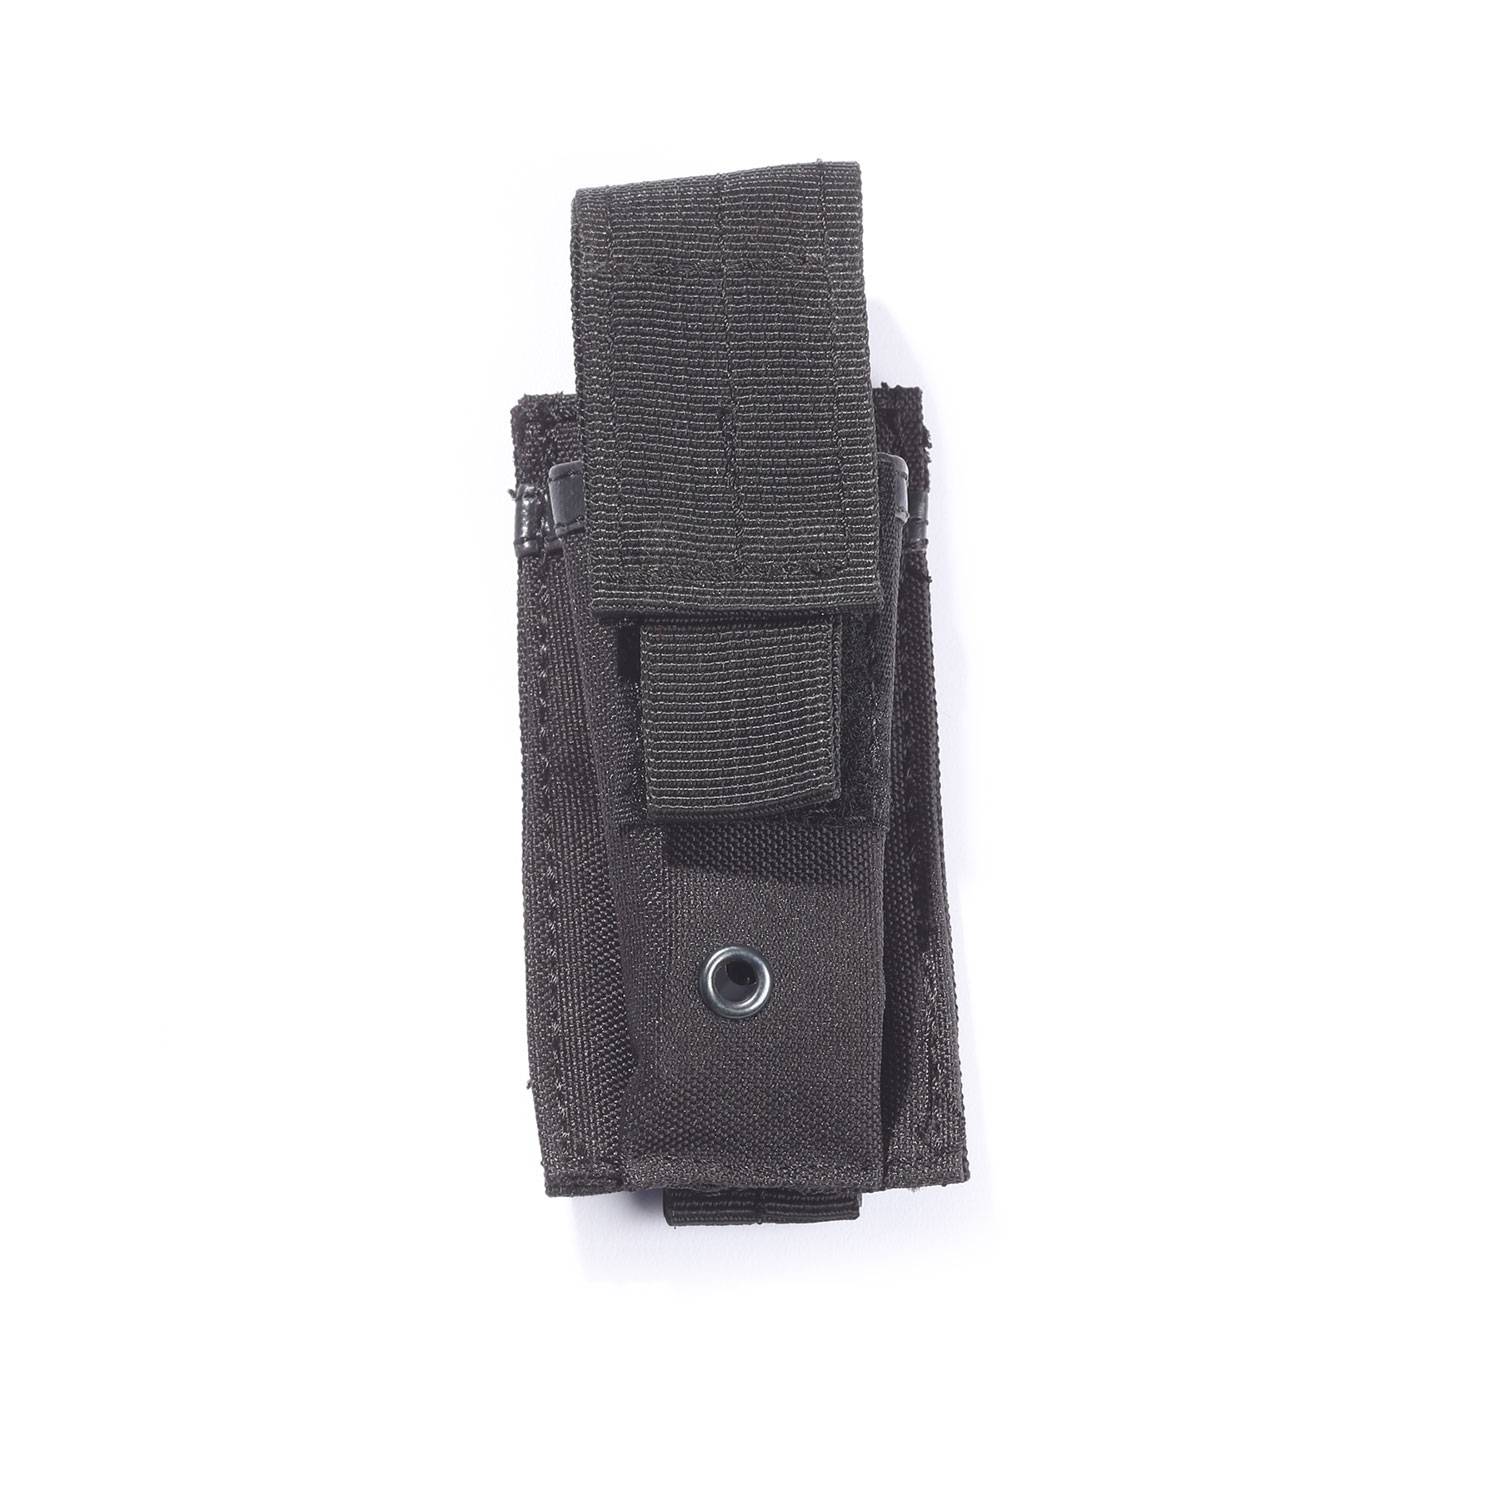 5IVE STAR GEAR MPS-5S SINGLE PISTOL MAG POUCH